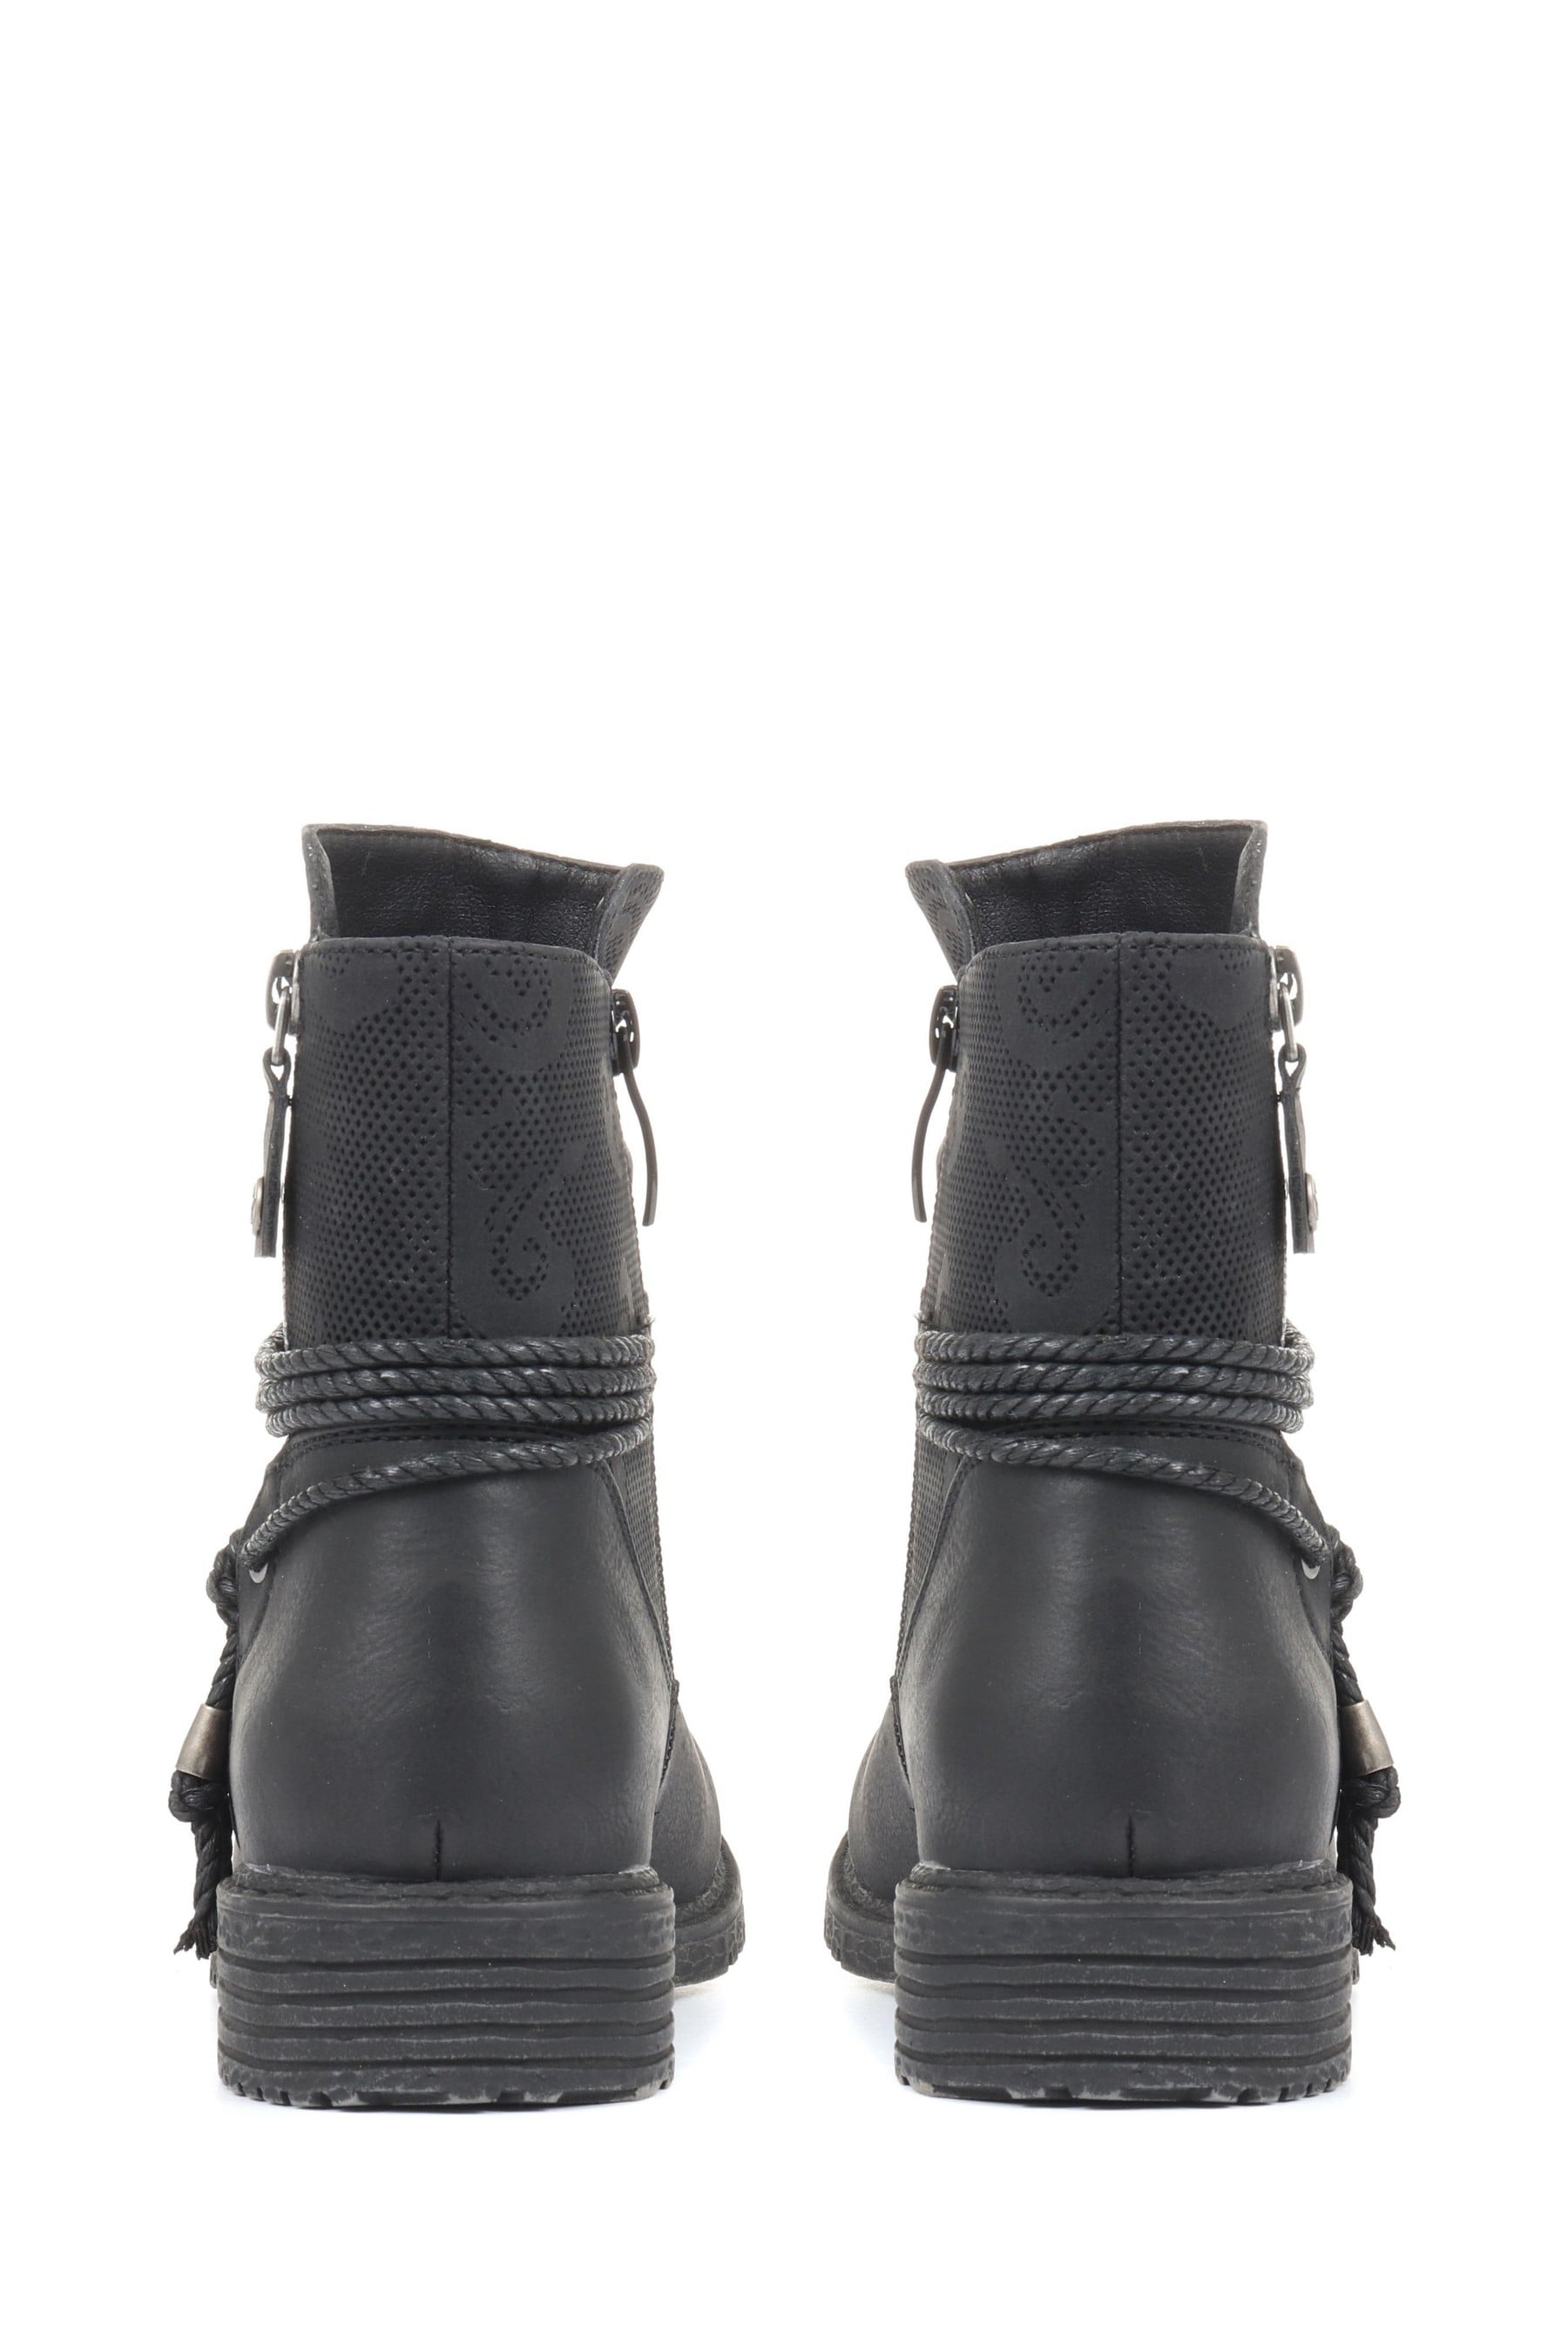 Buy Pavers Black Slouch Ankle Boots from the Next UK online shop